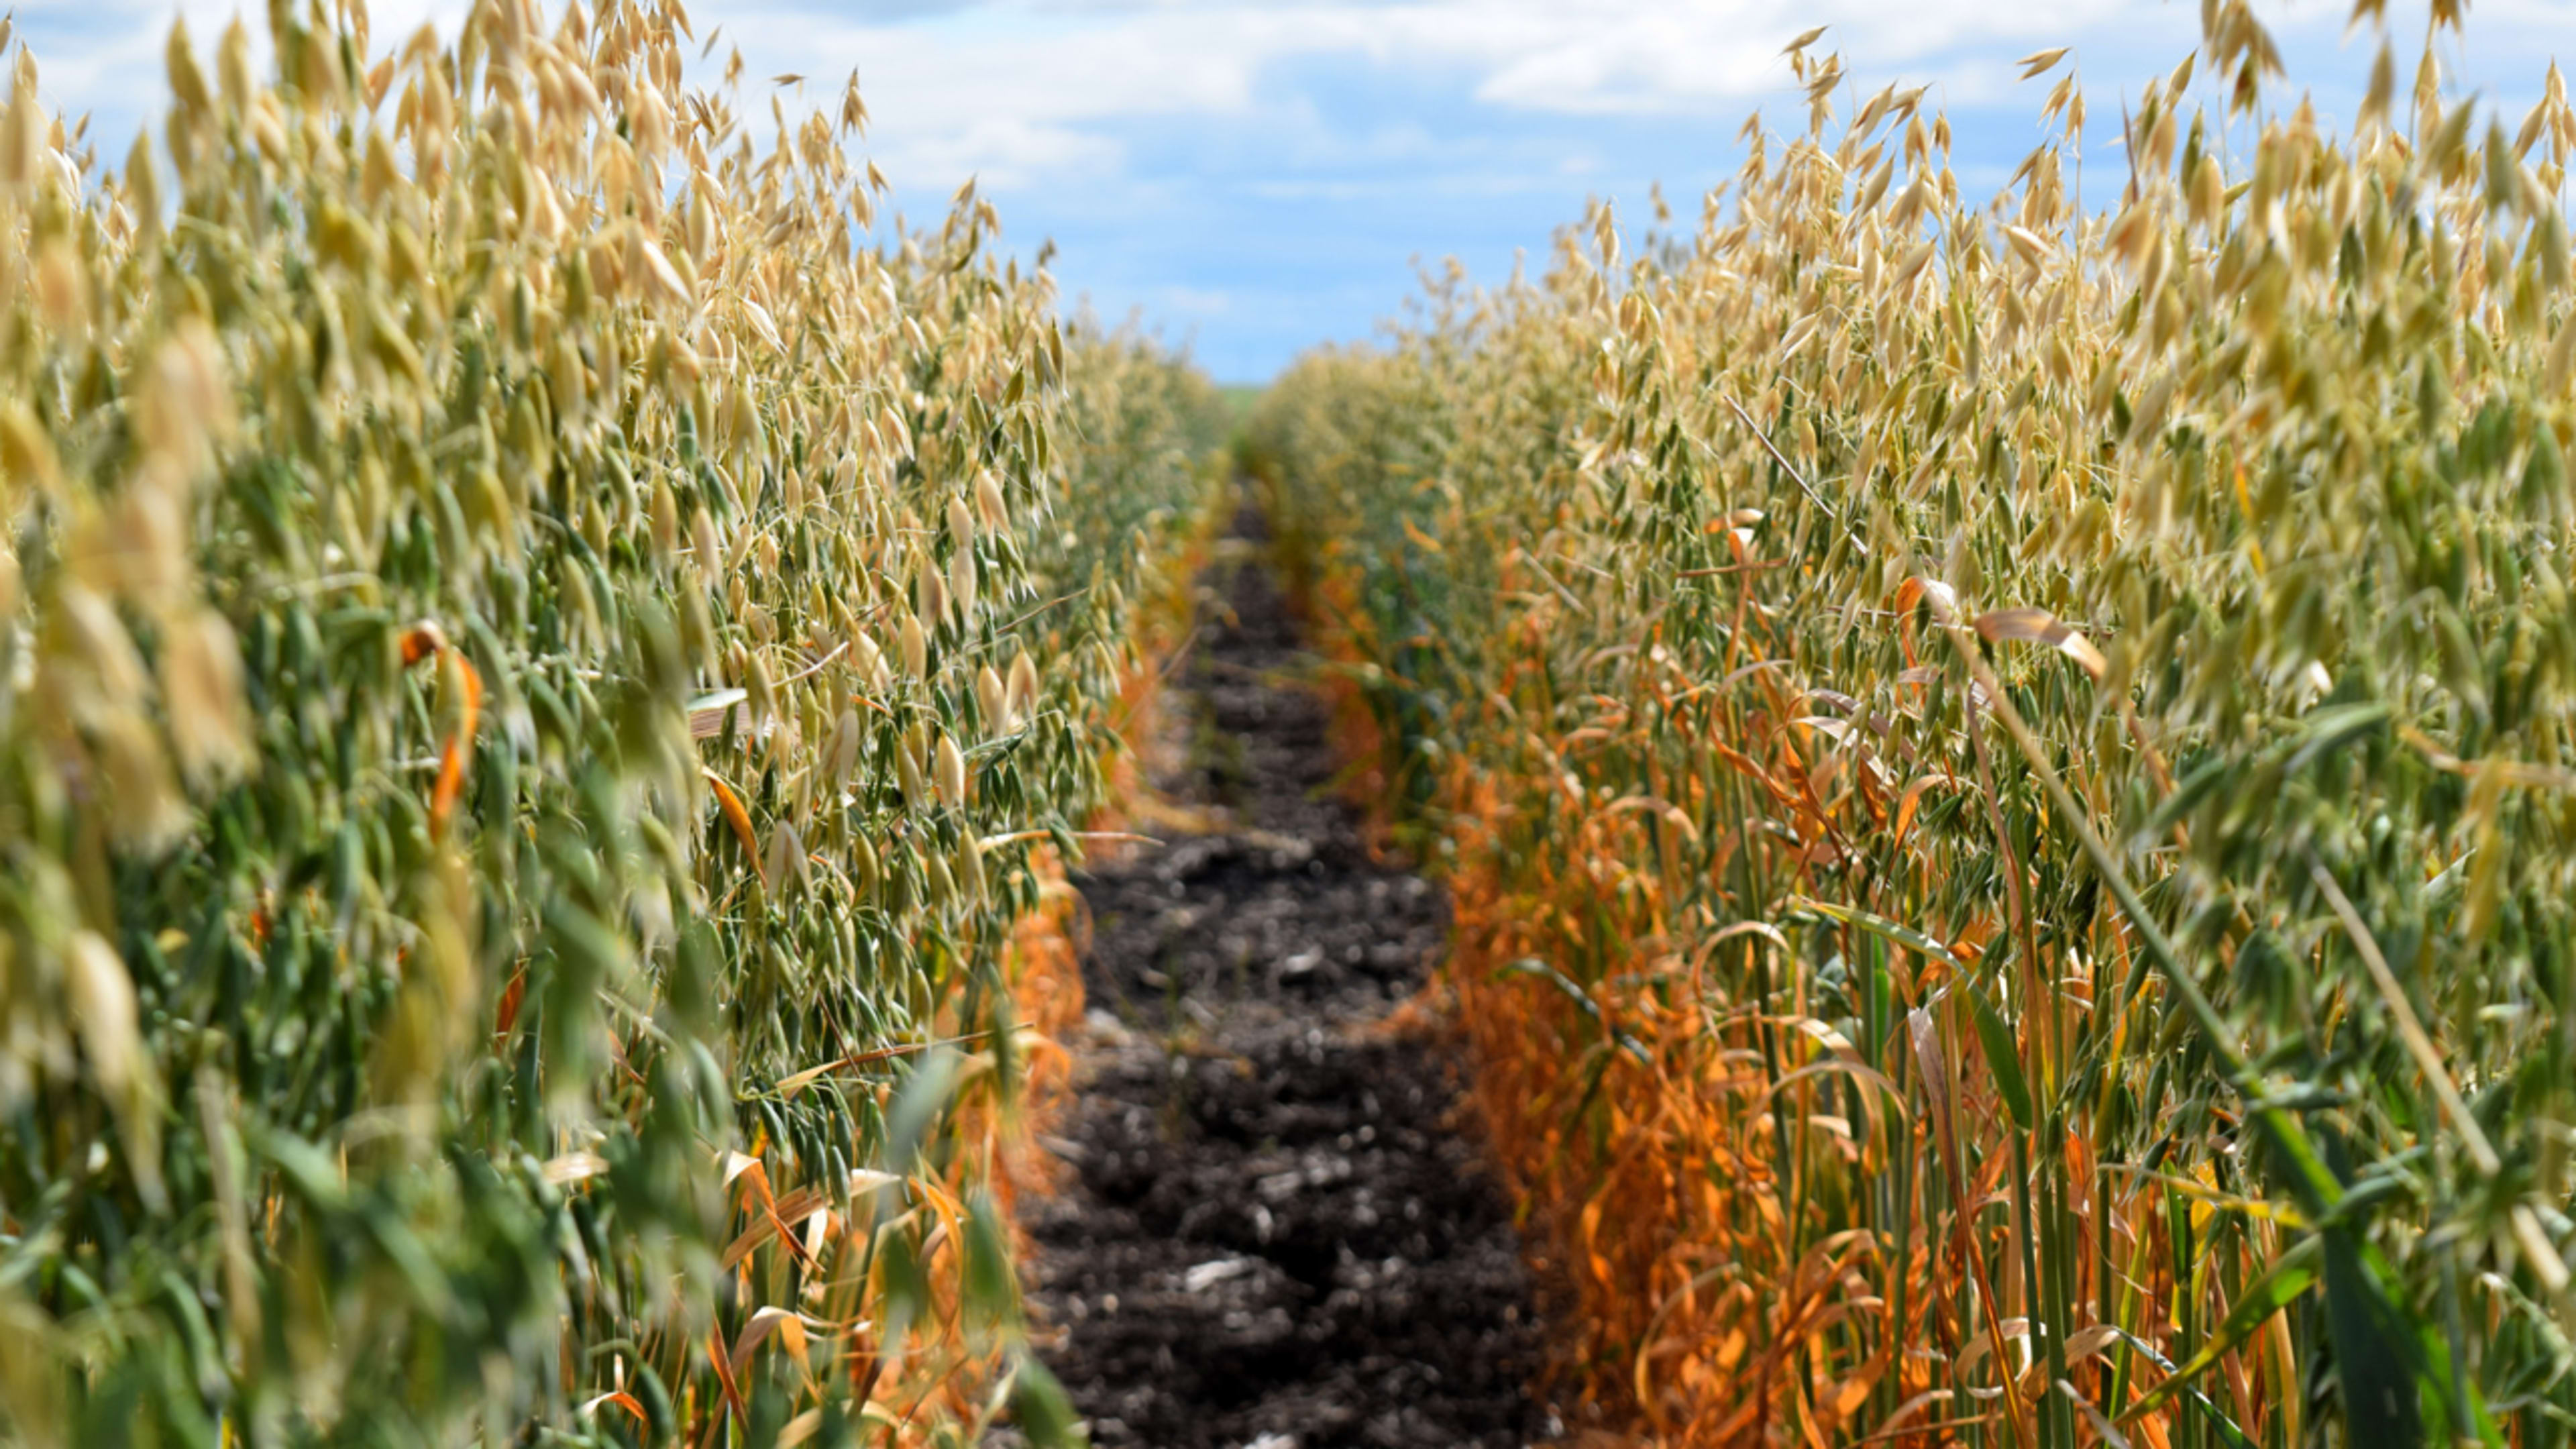 General Mills has a plan to regenerate 1 million acres of farmland